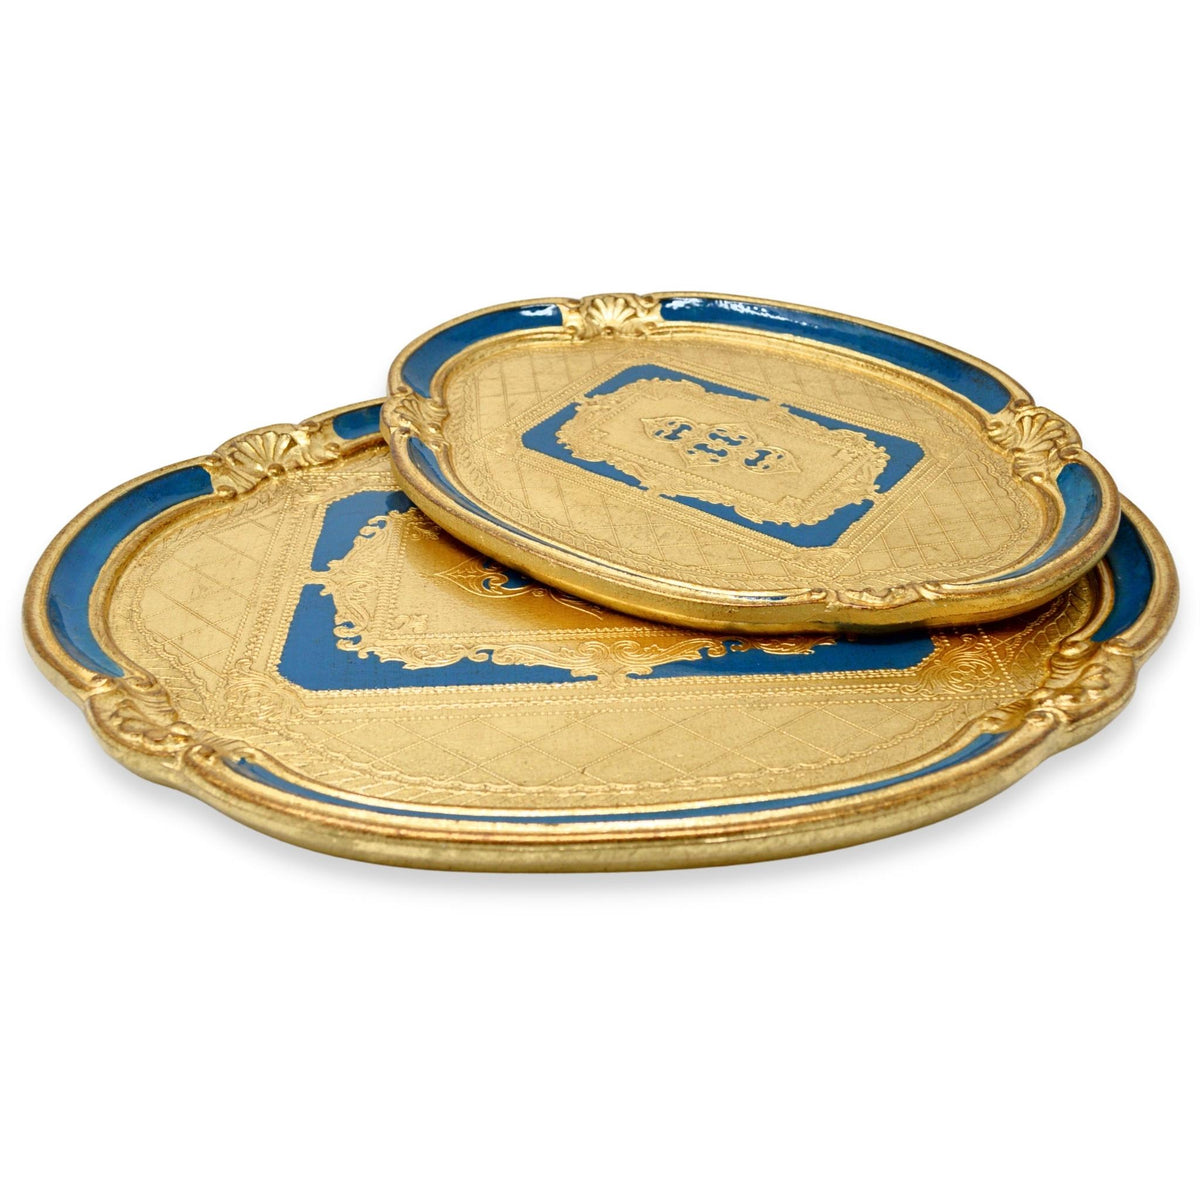 Florentine Oval Carved Wood Trays, Set of 2, Cobalt Blue, Made in Italy - My Italian Decor